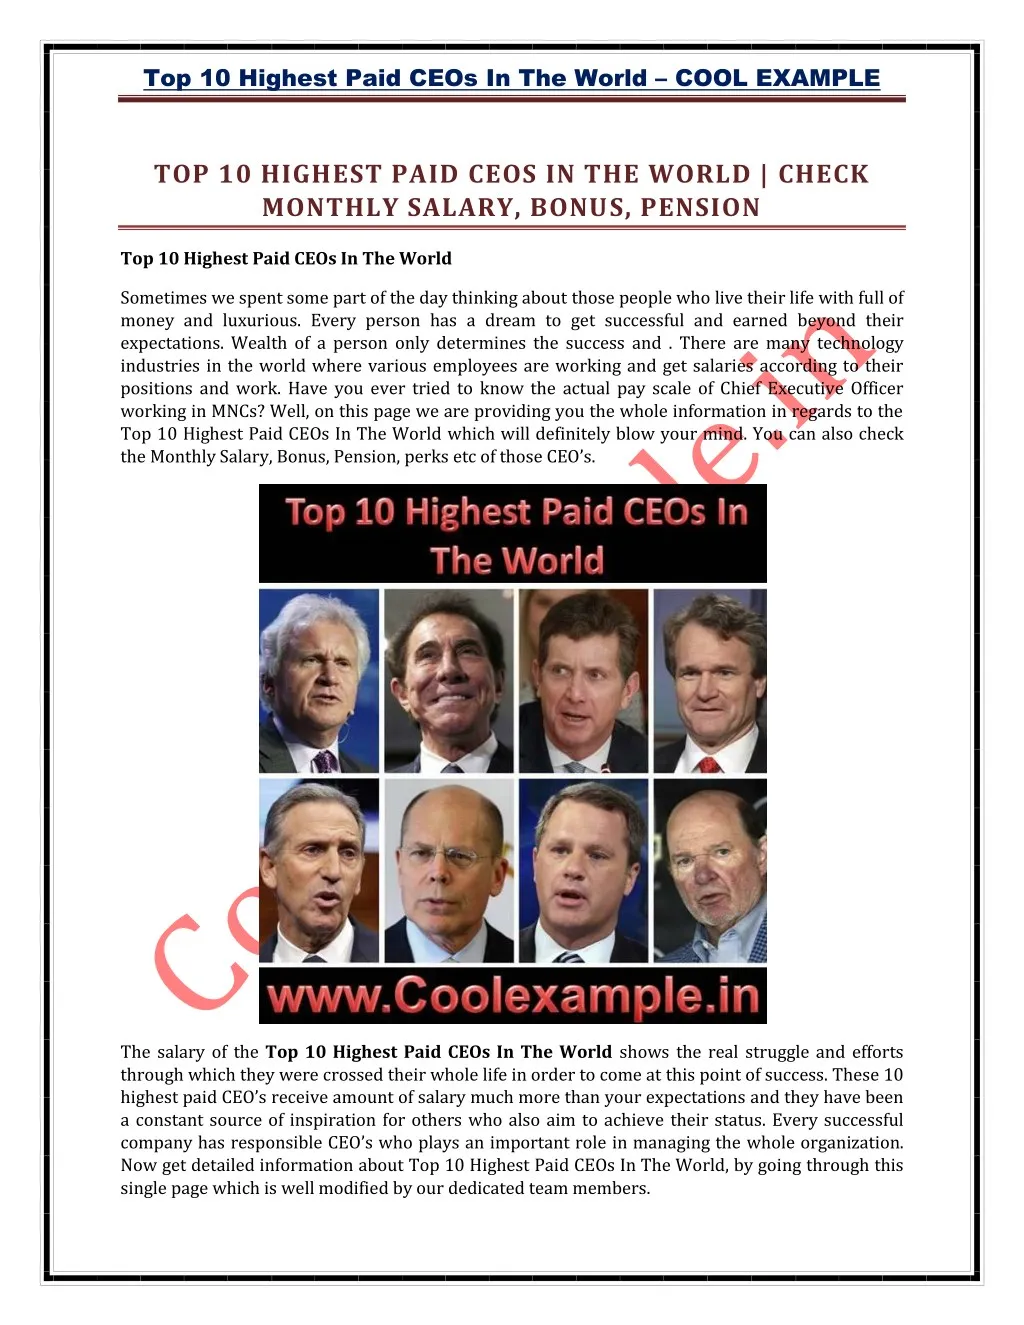 top 10 highest paid ceos in the world cool example